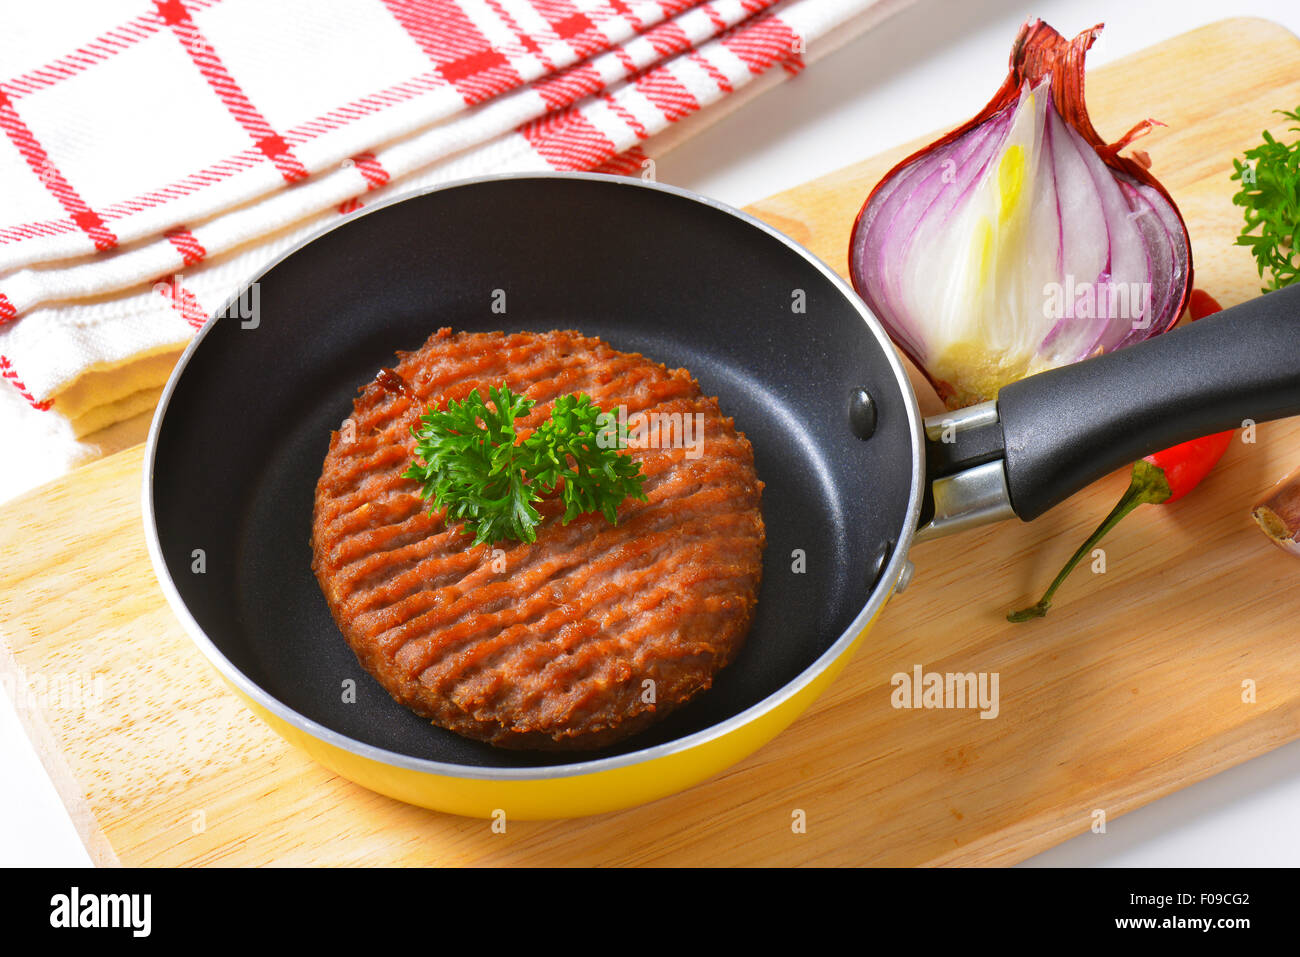 Tasty Grilled Beef Burger Grill Pan Stock Photo, Picture and Royalty Free  Image. Image 82408769.